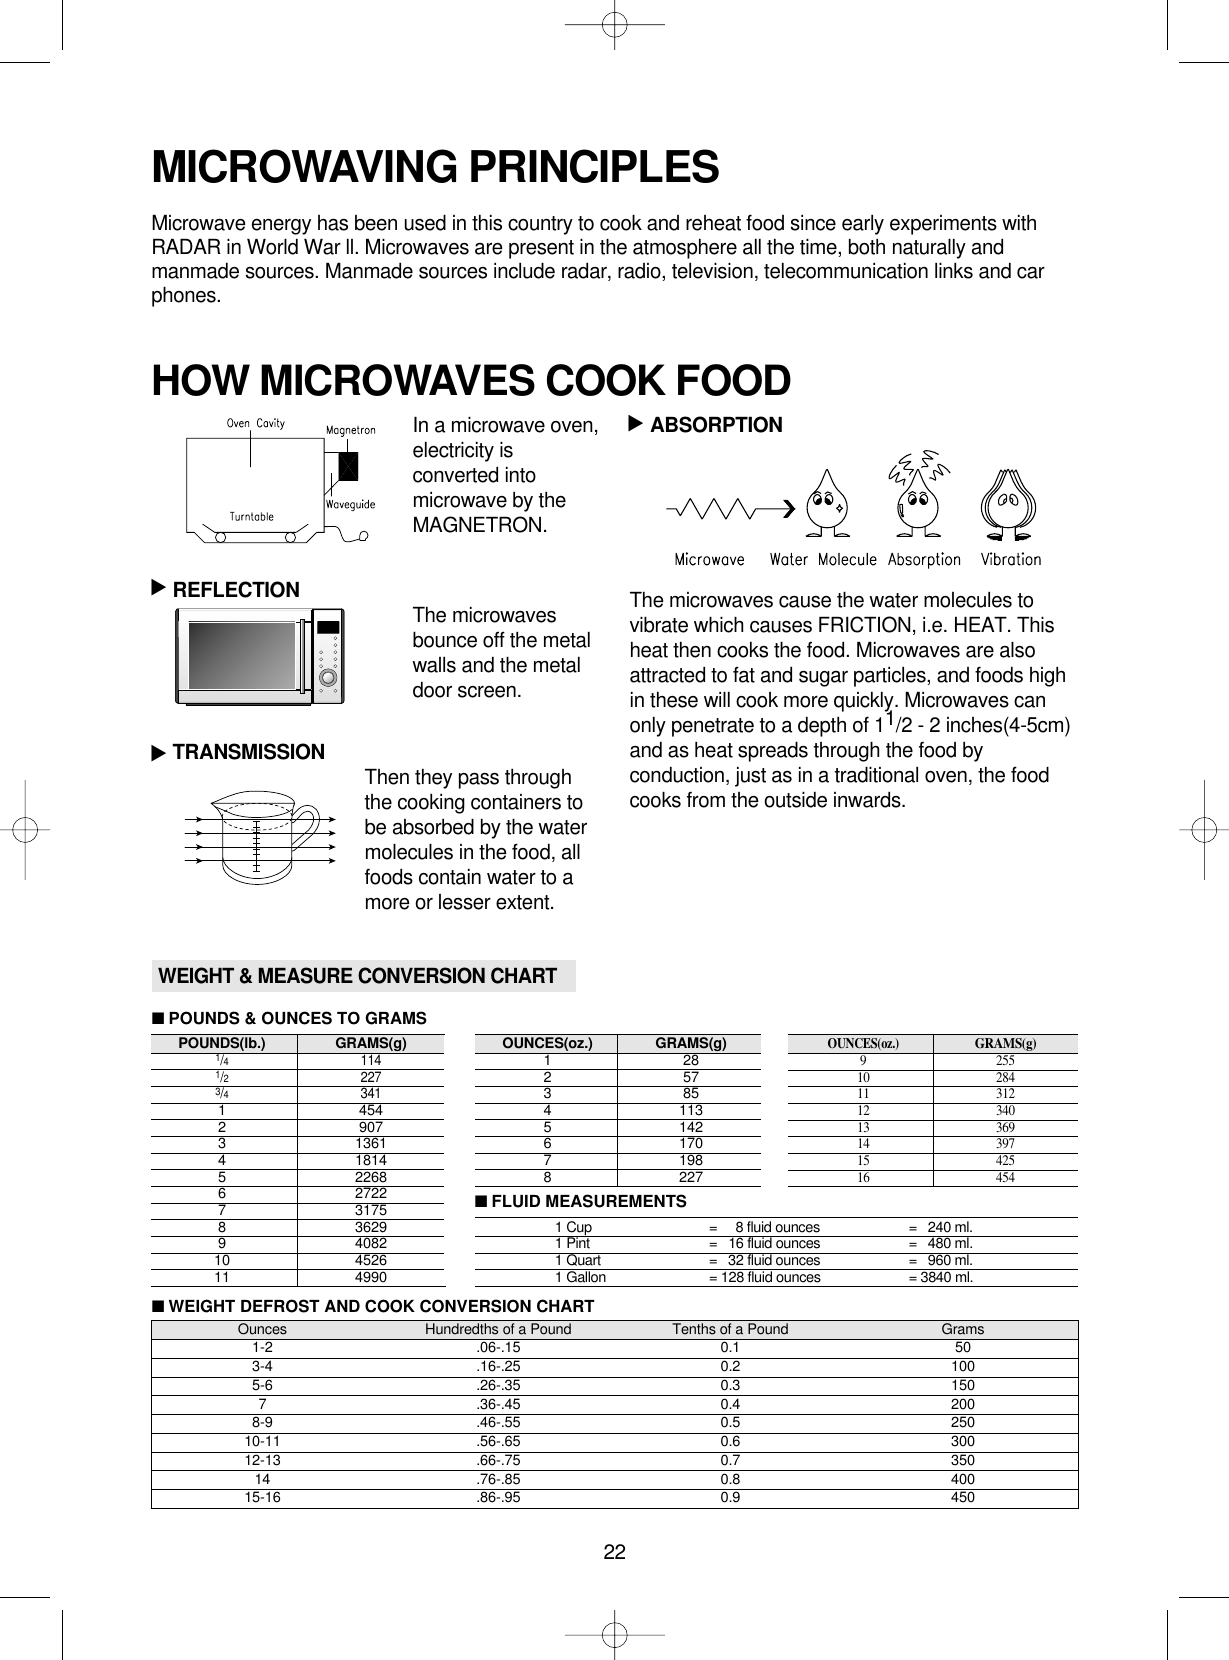 22MICROWAVING PRINCIPLESMicrowave energy has been used in this country to cook and reheat food since early experiments withRADAR in World War ll. Microwaves are present in the atmosphere all the time, both naturally andmanmade sources. Manmade sources include radar, radio, television, telecommunication links and carphones.In a microwave oven,electricity isconverted intomicrowave by theMAGNETRON.REFLECTION The microwavesbounce off the metalwalls and the metaldoor screen.TRANSMISSION Then they pass throughthe cooking containers tobe absorbed by the watermolecules in the food, allfoods contain water to amore or lesser extent.ABSORPTIONThe microwaves cause the water molecules tovibrate which causes FRICTION, i.e. HEAT. Thisheat then cooks the food. Microwaves are alsoattracted to fat and sugar particles, and foods highin these will cook more quickly. Microwaves canonly penetrate to a depth of 11/2 - 2 inches(4-5cm)and as heat spreads through the food byconduction, just as in a traditional oven, the foodcooks from the outside inwards.HOW MICROWAVES COOK FOOD▲▲▲WEIGHT &amp; MEASURE CONVERSION CHARTOunces Hundredths of a Pound Tenths of a Pound Grams1-2 .06-.15 0.1 503-4 .16-.25 0.2 1005-6 .26-.35 0.3 1507 .36-.45 0.4 2008-9 .46-.55 0.5 25010-11 .56-.65 0.6 30012-13 .66-.75 0.7 35014 .76-.85 0.8 40015-16 .86-.95 0.9 450■WEIGHT DEFROST AND COOK CONVERSION CHARTPOUNDS(lb.) GRAMS(g)1/41141/22273/43411 4542 9073 13614 18145 22686 27227 31758 36299 408210 452611 4990■POUNDS &amp; OUNCES TO GRAMS■FLUID MEASUREMENTSOUNCES(oz.) GRAMS(g)1282573854 1135 1426 1707 1988 227OUNCES(oz.)GRAMS(g)9 25510 28411 31212 34013 36914 39715 42516 4541 Cup =     8 fluid ounces =   240 ml.1 Pint =   16 fluid ounces =   480 ml.1 Quart =   32 fluid ounces =   960 ml.1 Gallon = 128 fluid ounces = 3840 ml.